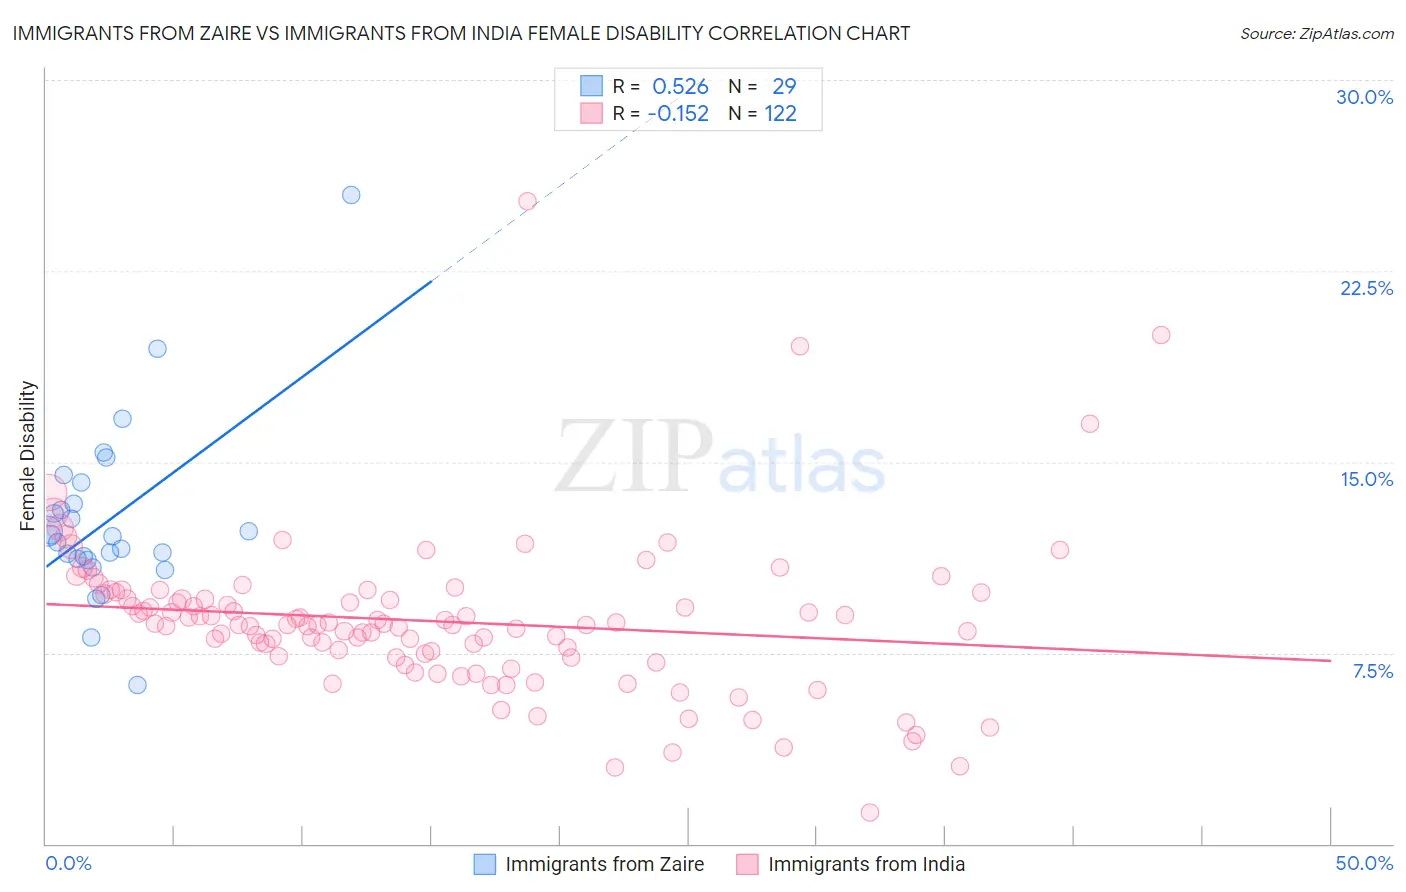 Immigrants from Zaire vs Immigrants from India Female Disability